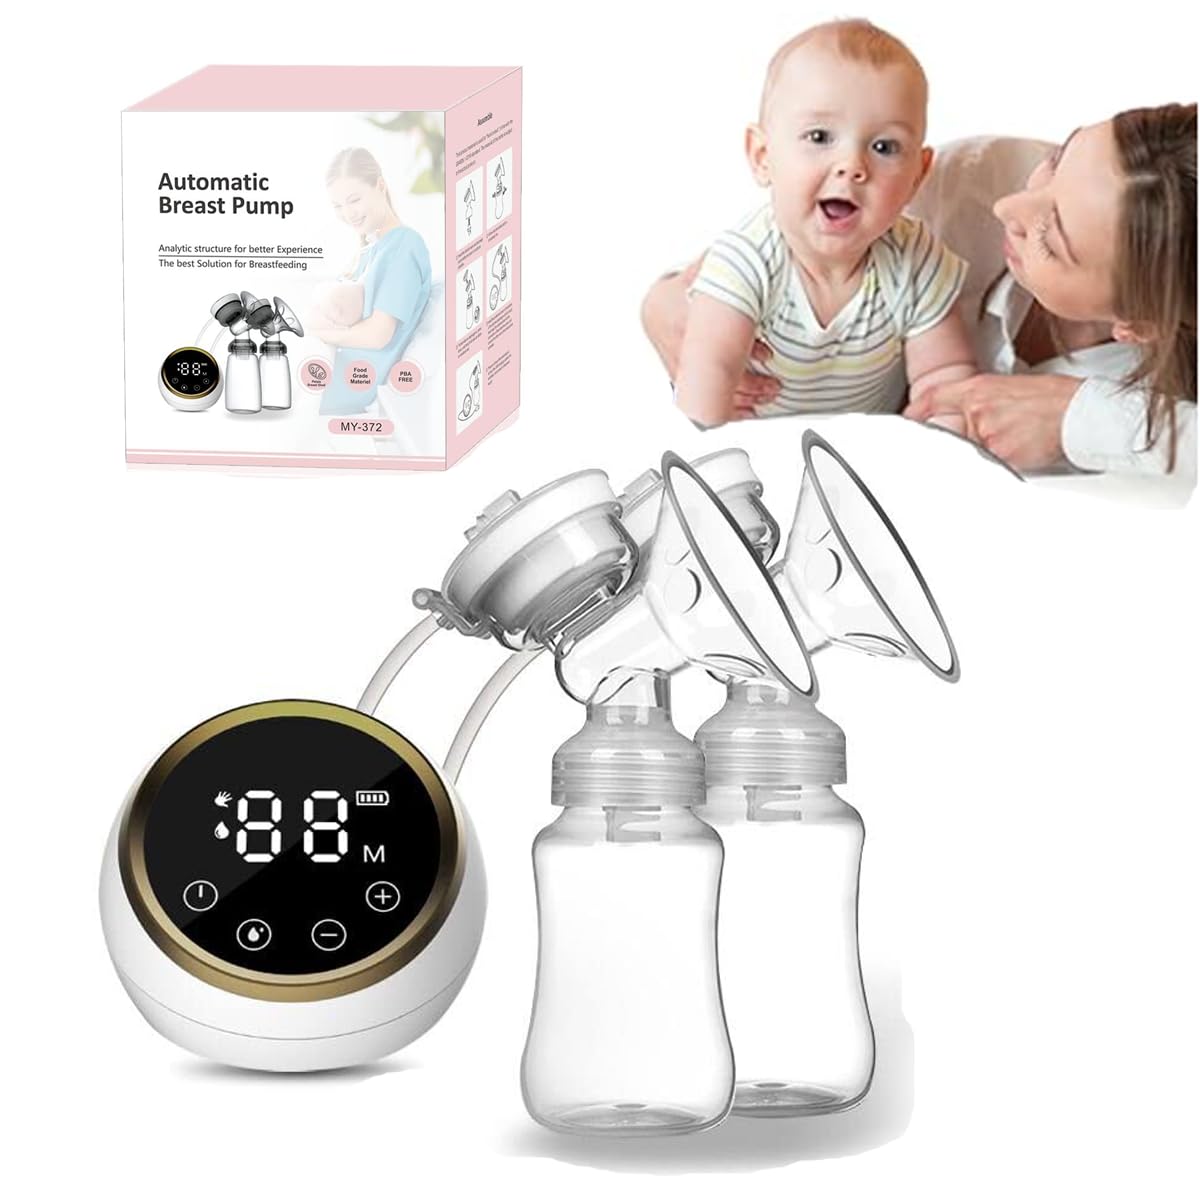 Double Electric Breast Pump, ALMEKAQUZ Safe Baby Breastfeeding Pacifier Bottle Suction Massage Pump Kit with 3 Modes 9 Levels, Quiet and Rechargeable Breast Pump for Home Travel Working